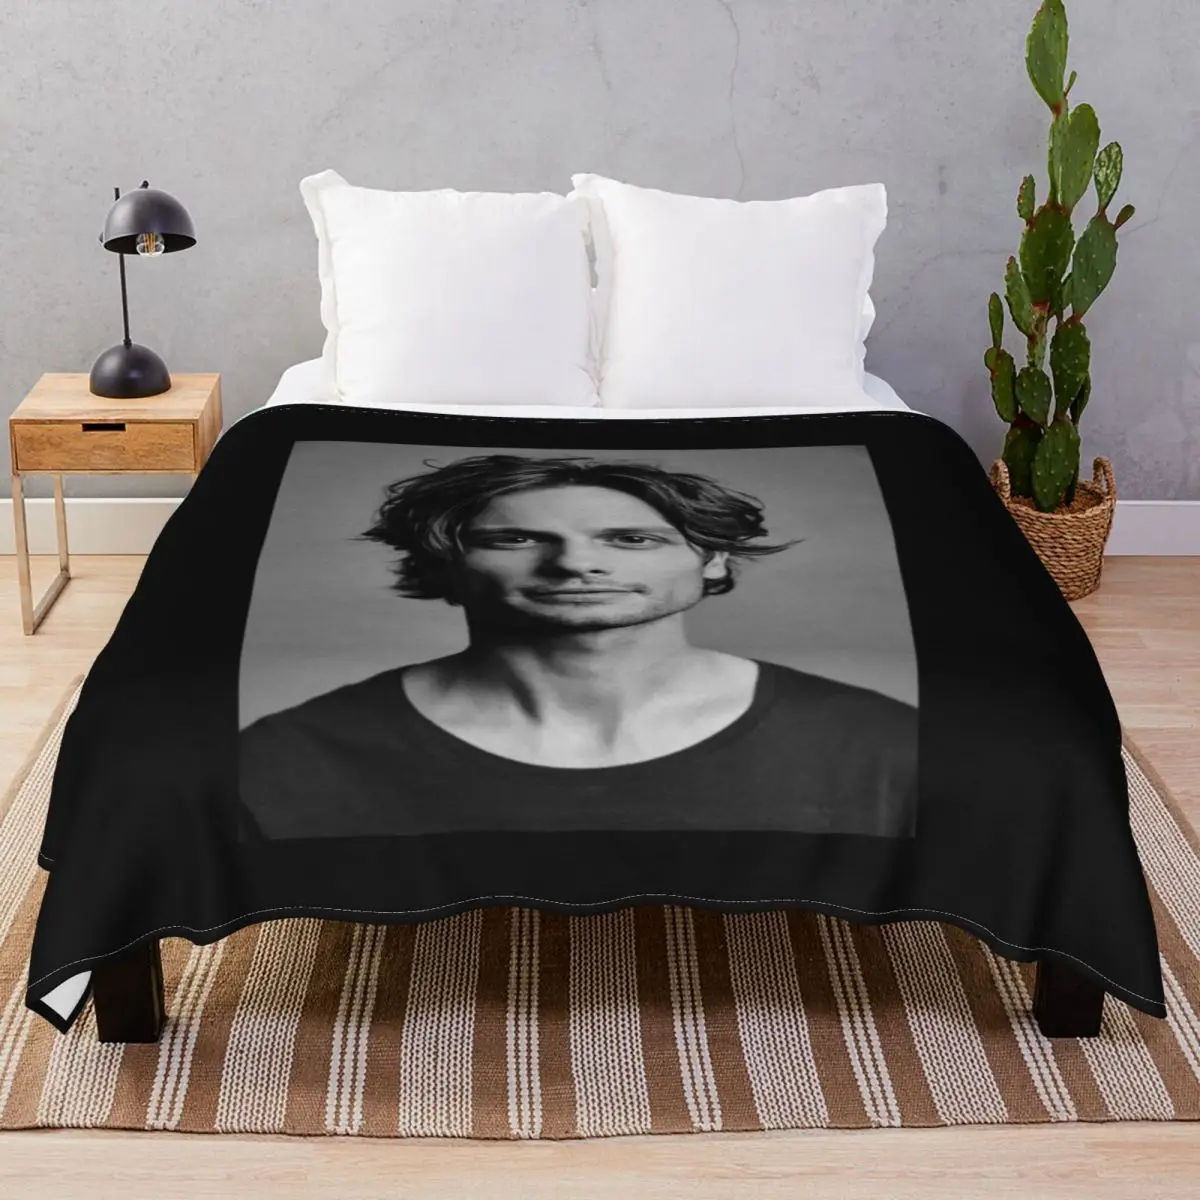 Matthew Gray Gubler Blankets Flannel Plush Print Super Soft Throw Blanket for Bed Home Couch Travel Office